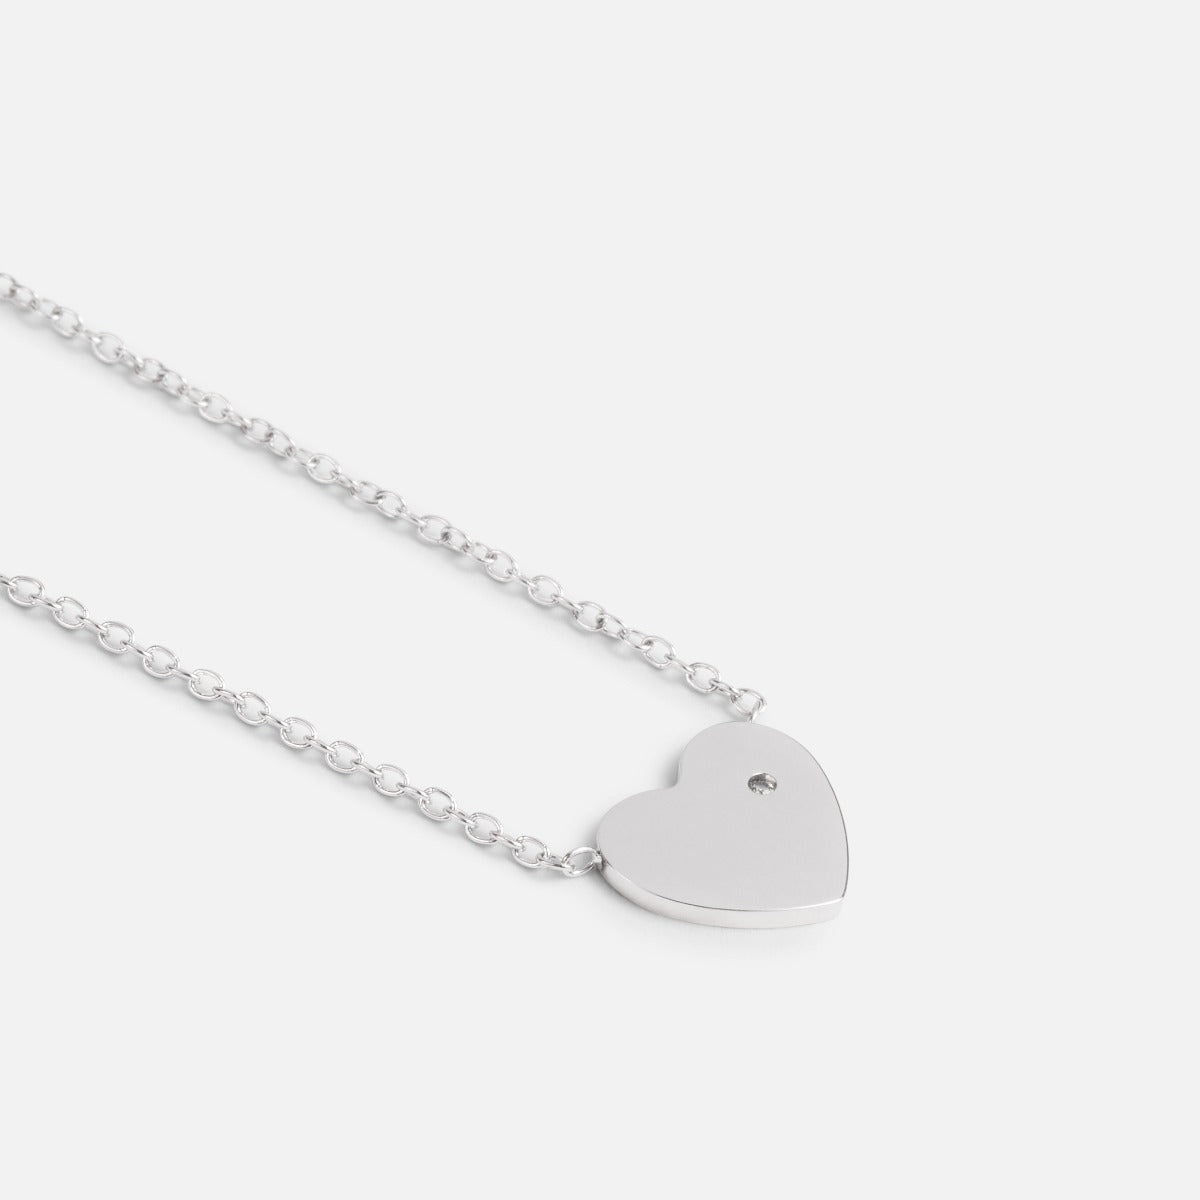 Stainless steel pendant with heart and small cubic zirconia stone